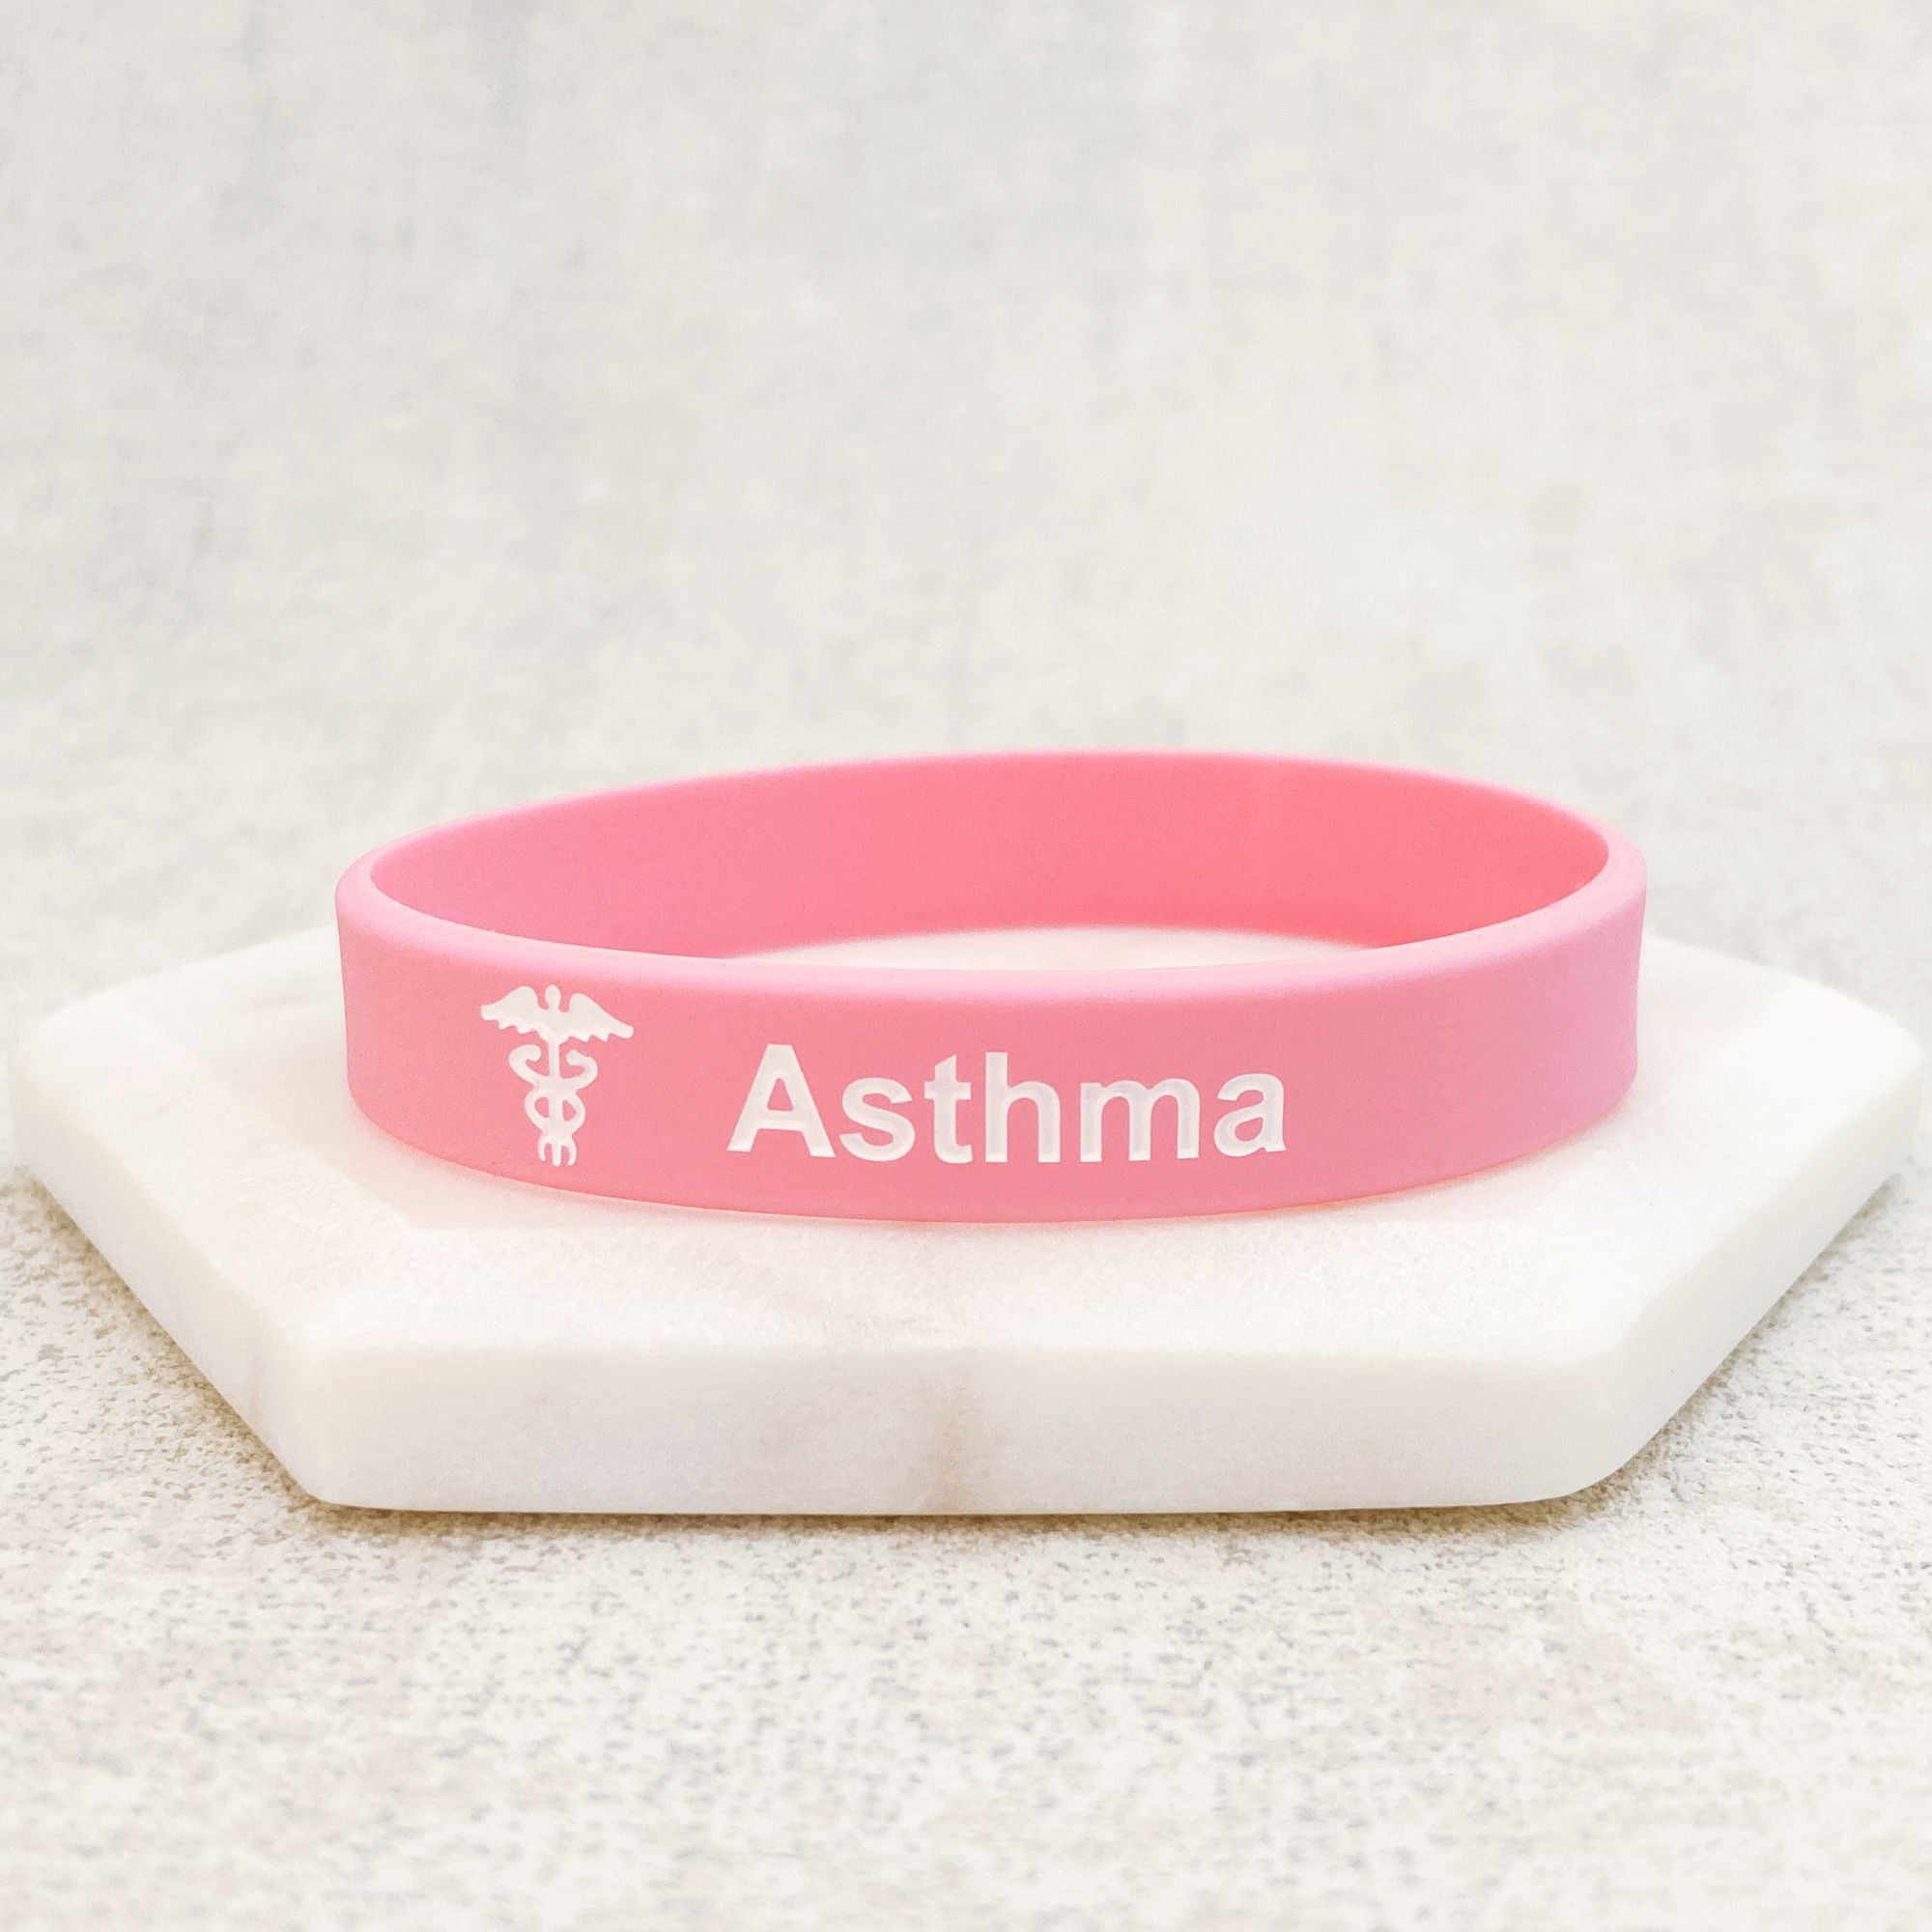 asthmatic wristbands sky pink